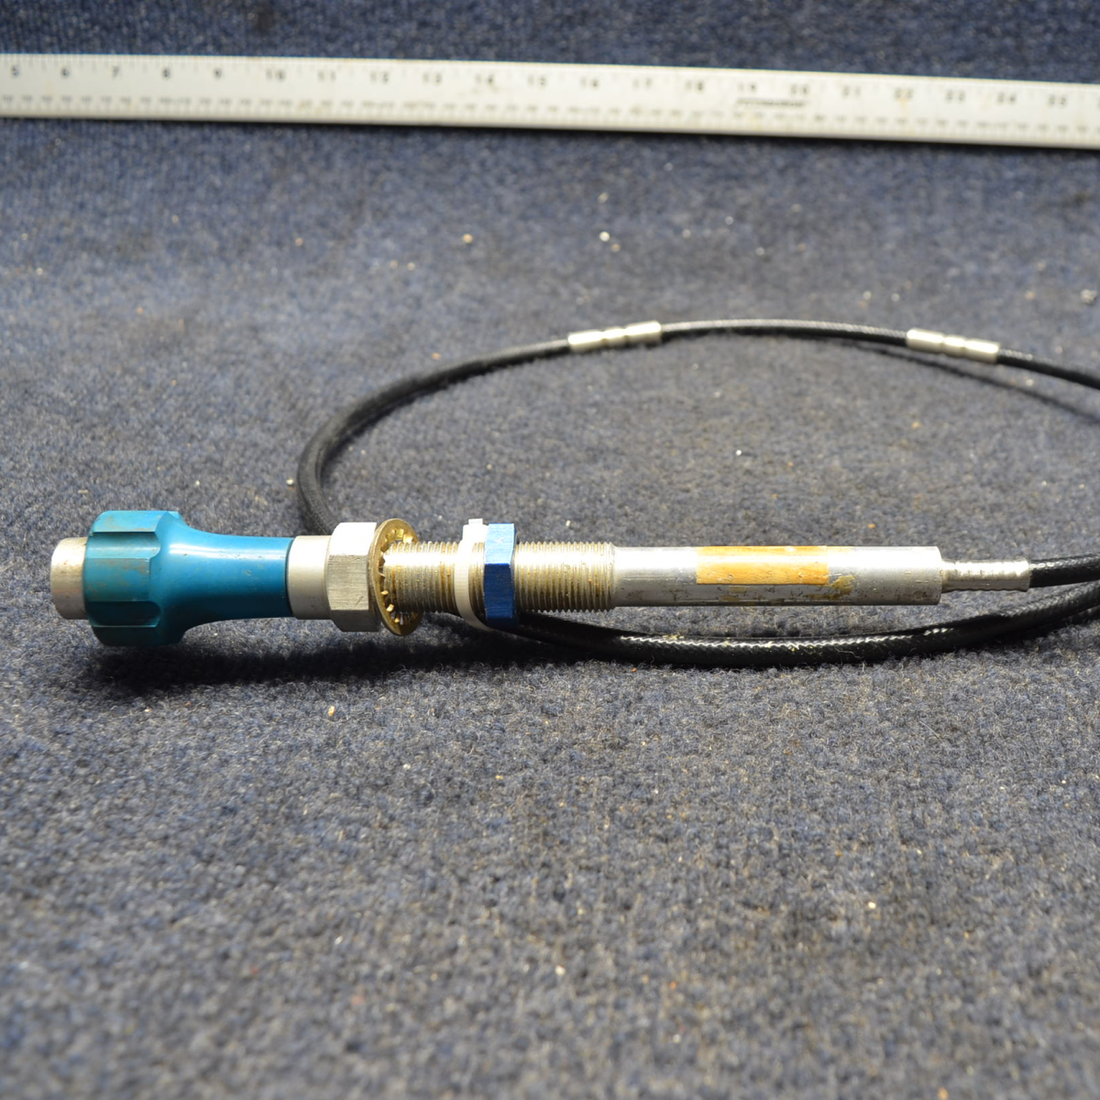 Used aircraft parts for sale, MGS1223-4 PIPER- CESSNA-BEECH- MOONEY VARIOS PROP CONTROL CABLE 56 IN